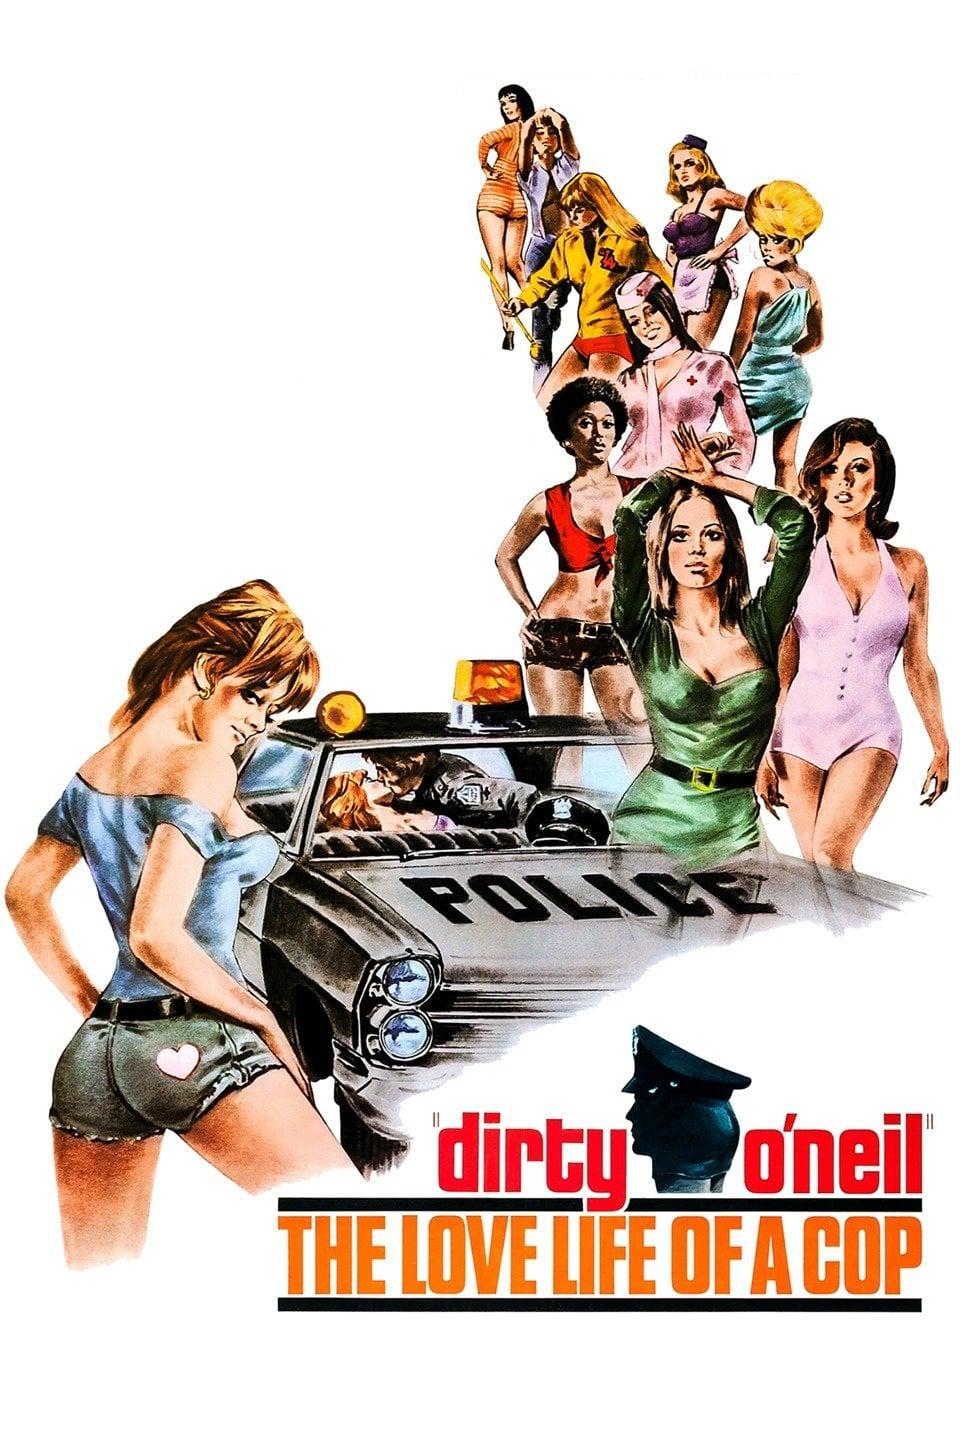 Dirty O'Neil poster